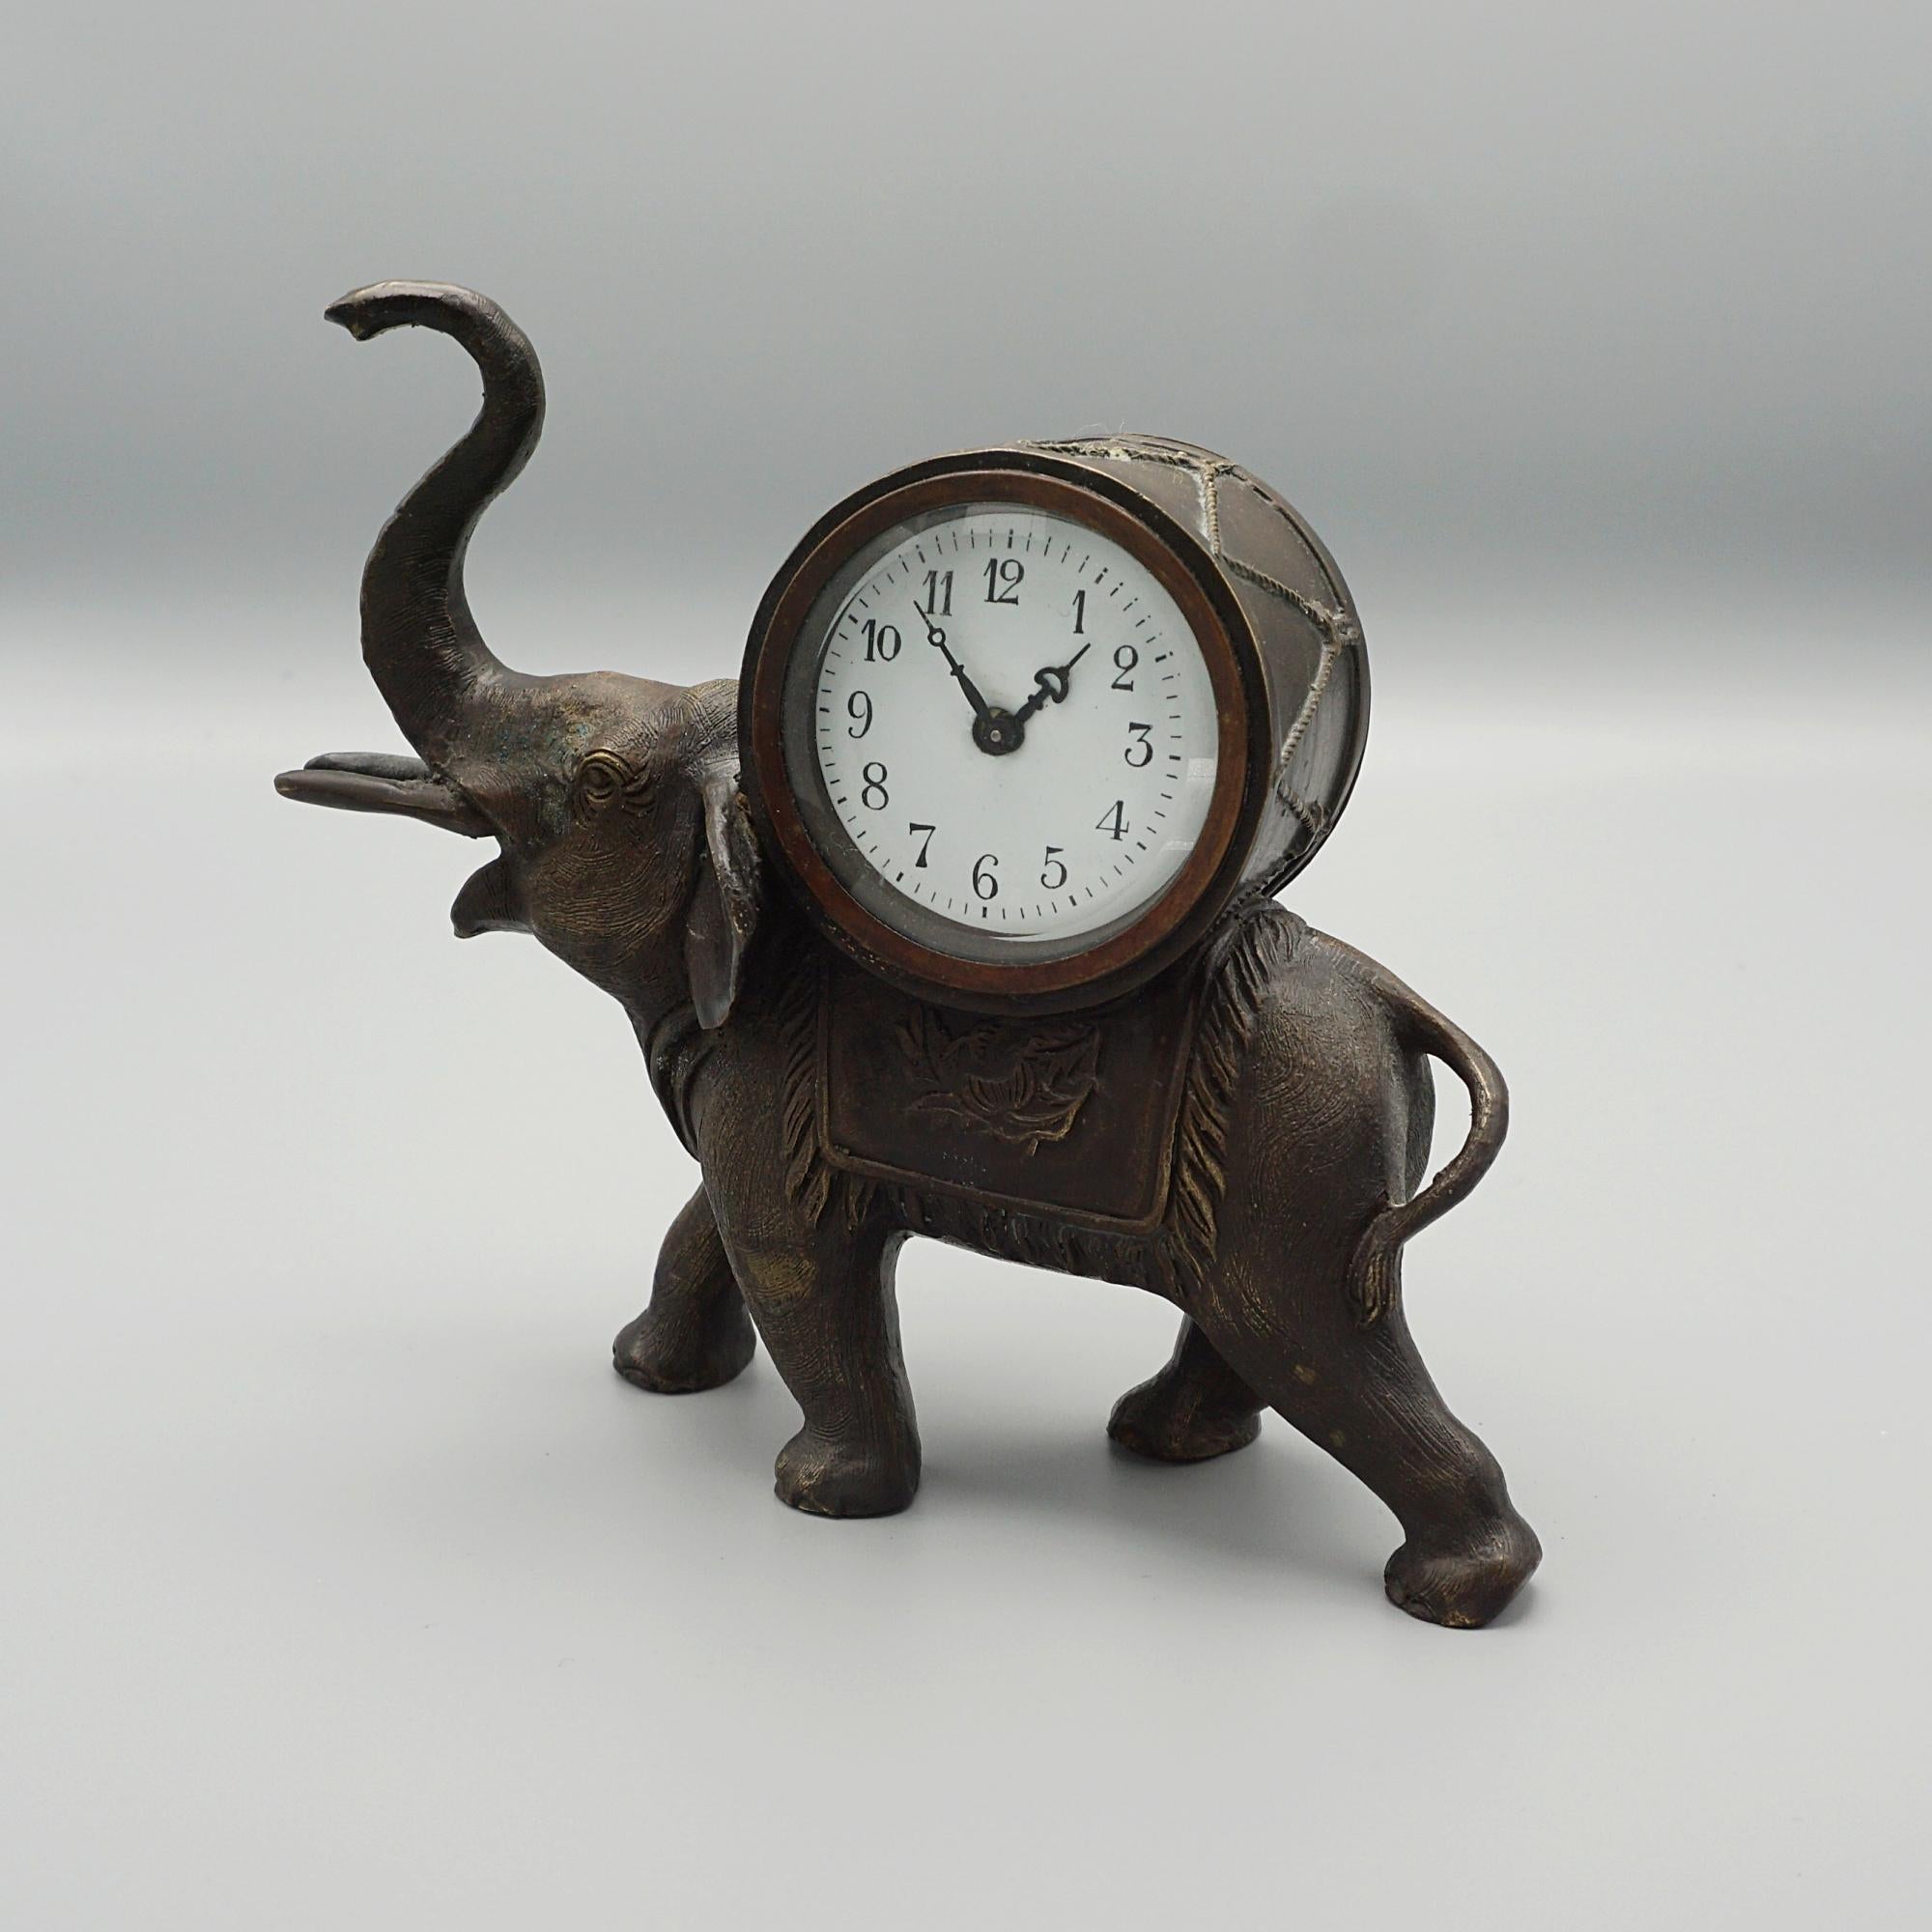 A late 19th century mantel clock in the form of a striding Elephant with trunk raised, carrying a clock on it's back. Original 8 Day Movement.

Dimensions: H 15.5cm W 18cm D 5cm

Origin: French

Date: Circa 1900

Item Number: 1603241